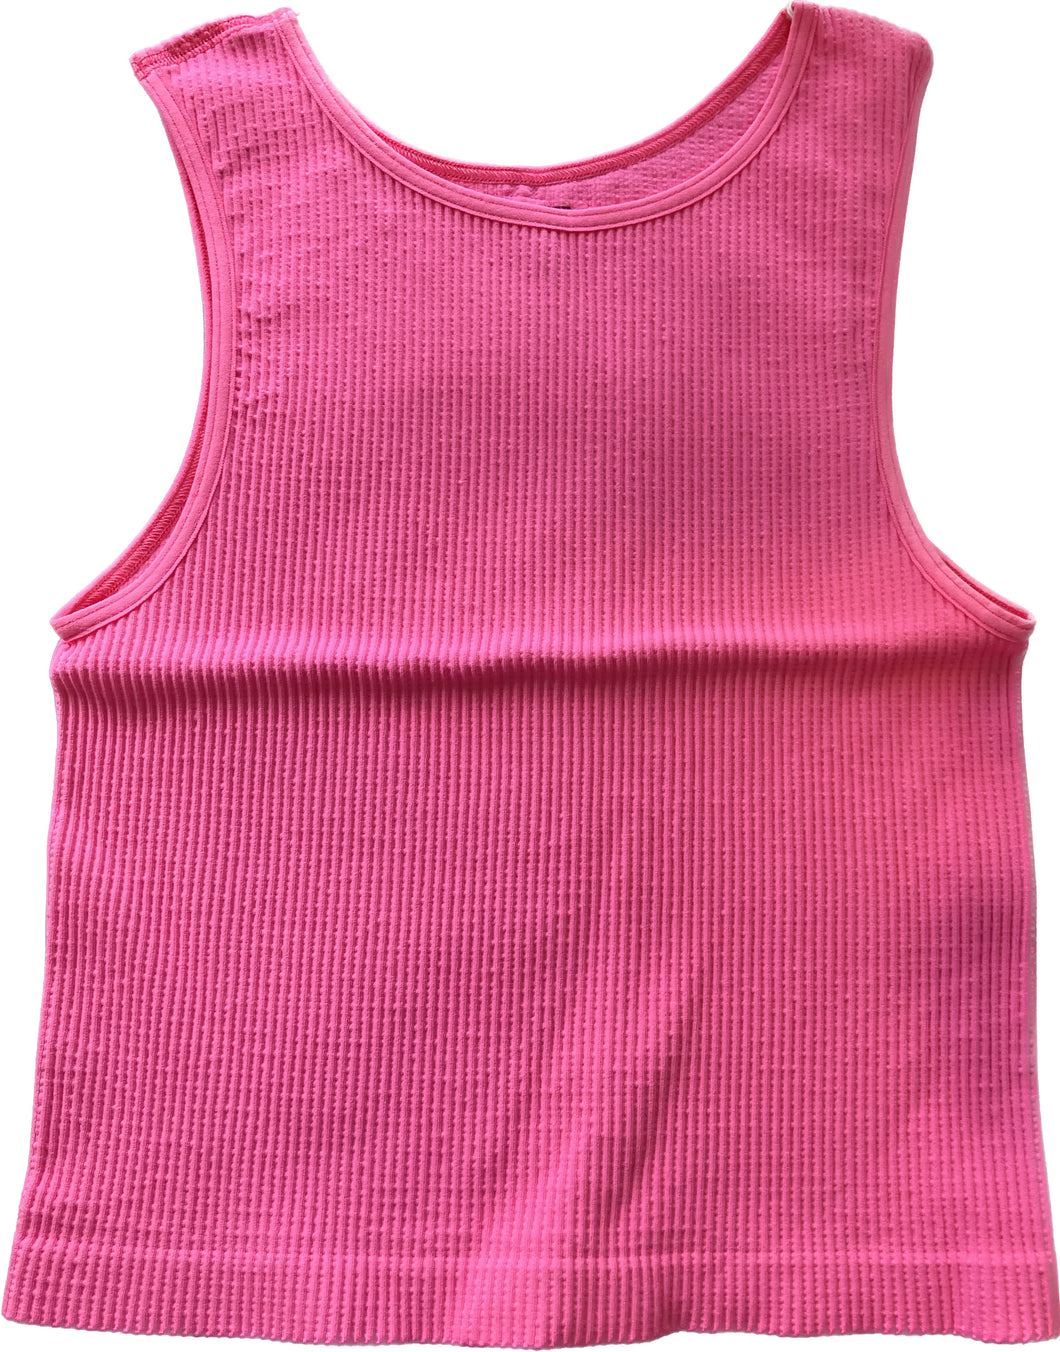 SL Ribbed Top - Pretty in Pink